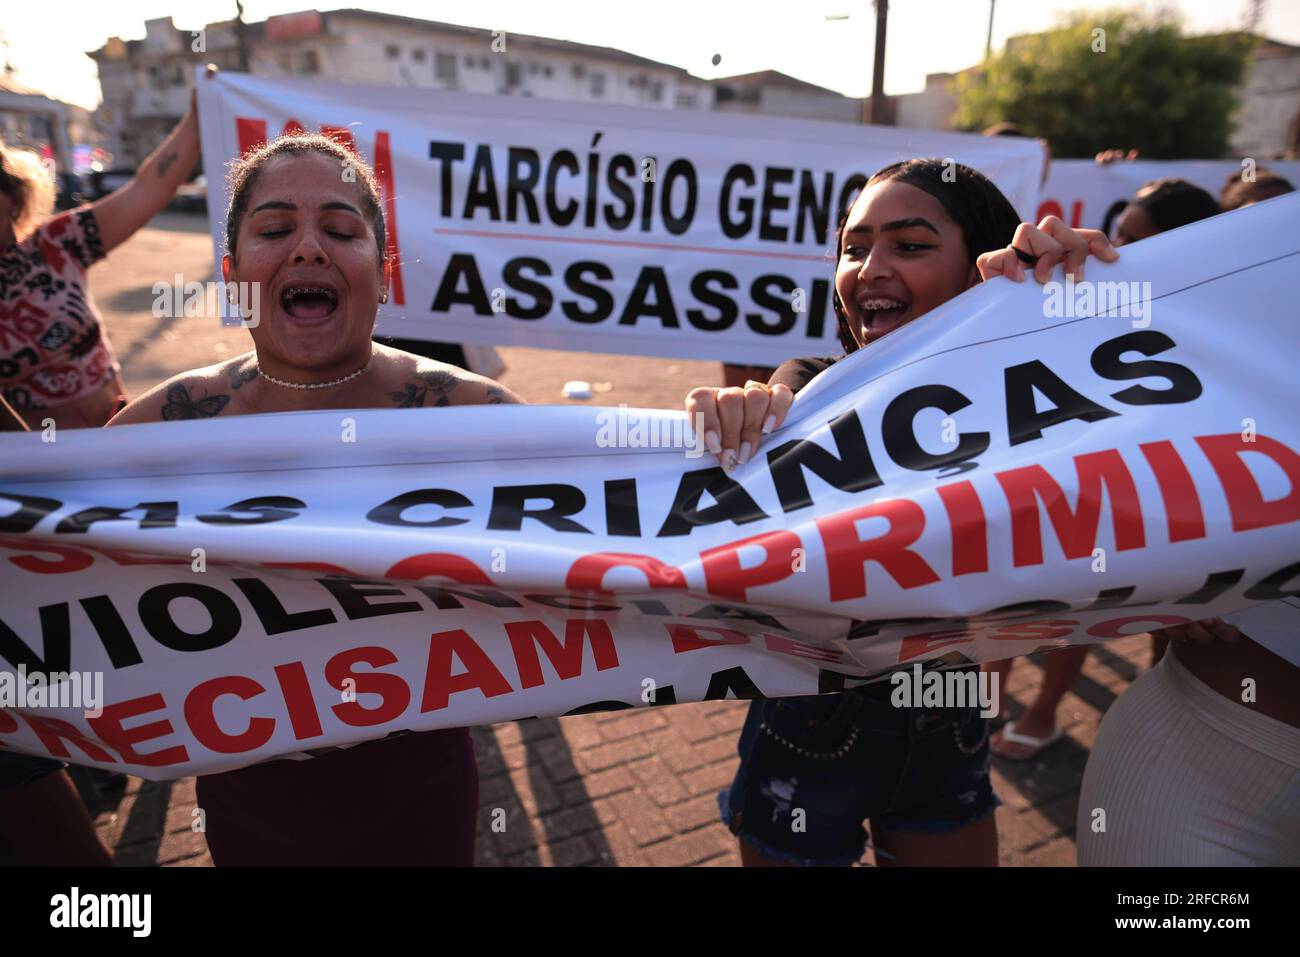 SP - GUARUJA - 08/02/2023 - GUARUJA, OPERATION ESCUDO - Protesters are seen with signs with the words &quot;Out Tarcisio Genocida, Assassin&quot; during an act against Operation Escudo, in Vicente de Carvalho, district of the city of Guaruja, this Wednesday -Friday (02). The Sao Paulo military police launched Operation Shield, strengthening policing and resulting in deaths in the cities of Santos and Guaruja in the Baixada Santista after a military police officer from ROTA, an elite troop of the Sao Paulo military police, was killed by a shotgun blast. fire during city tour. Photo: Ettore Chie Stock Photo